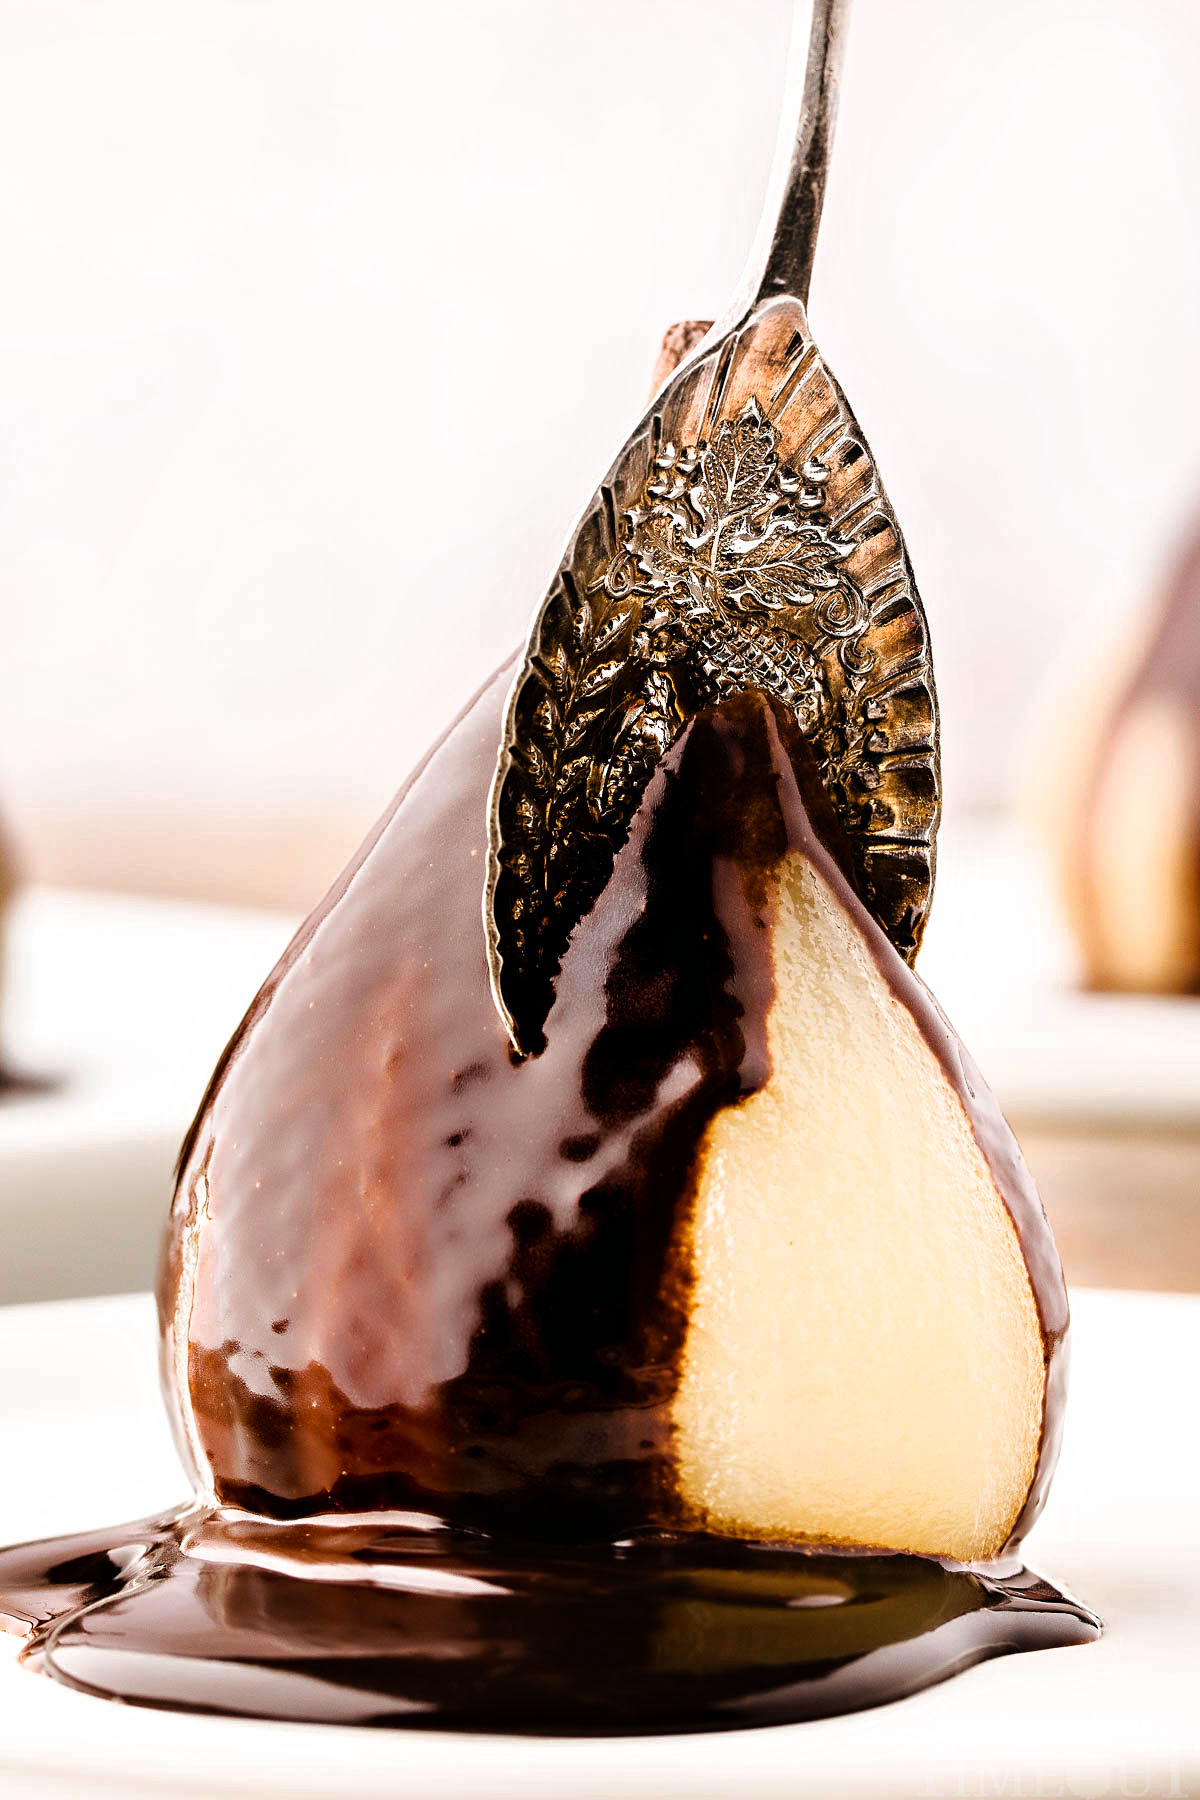 poached pear on white plate topped with chocolate sauce and a vintage spoon is cutting into the pear from the top.